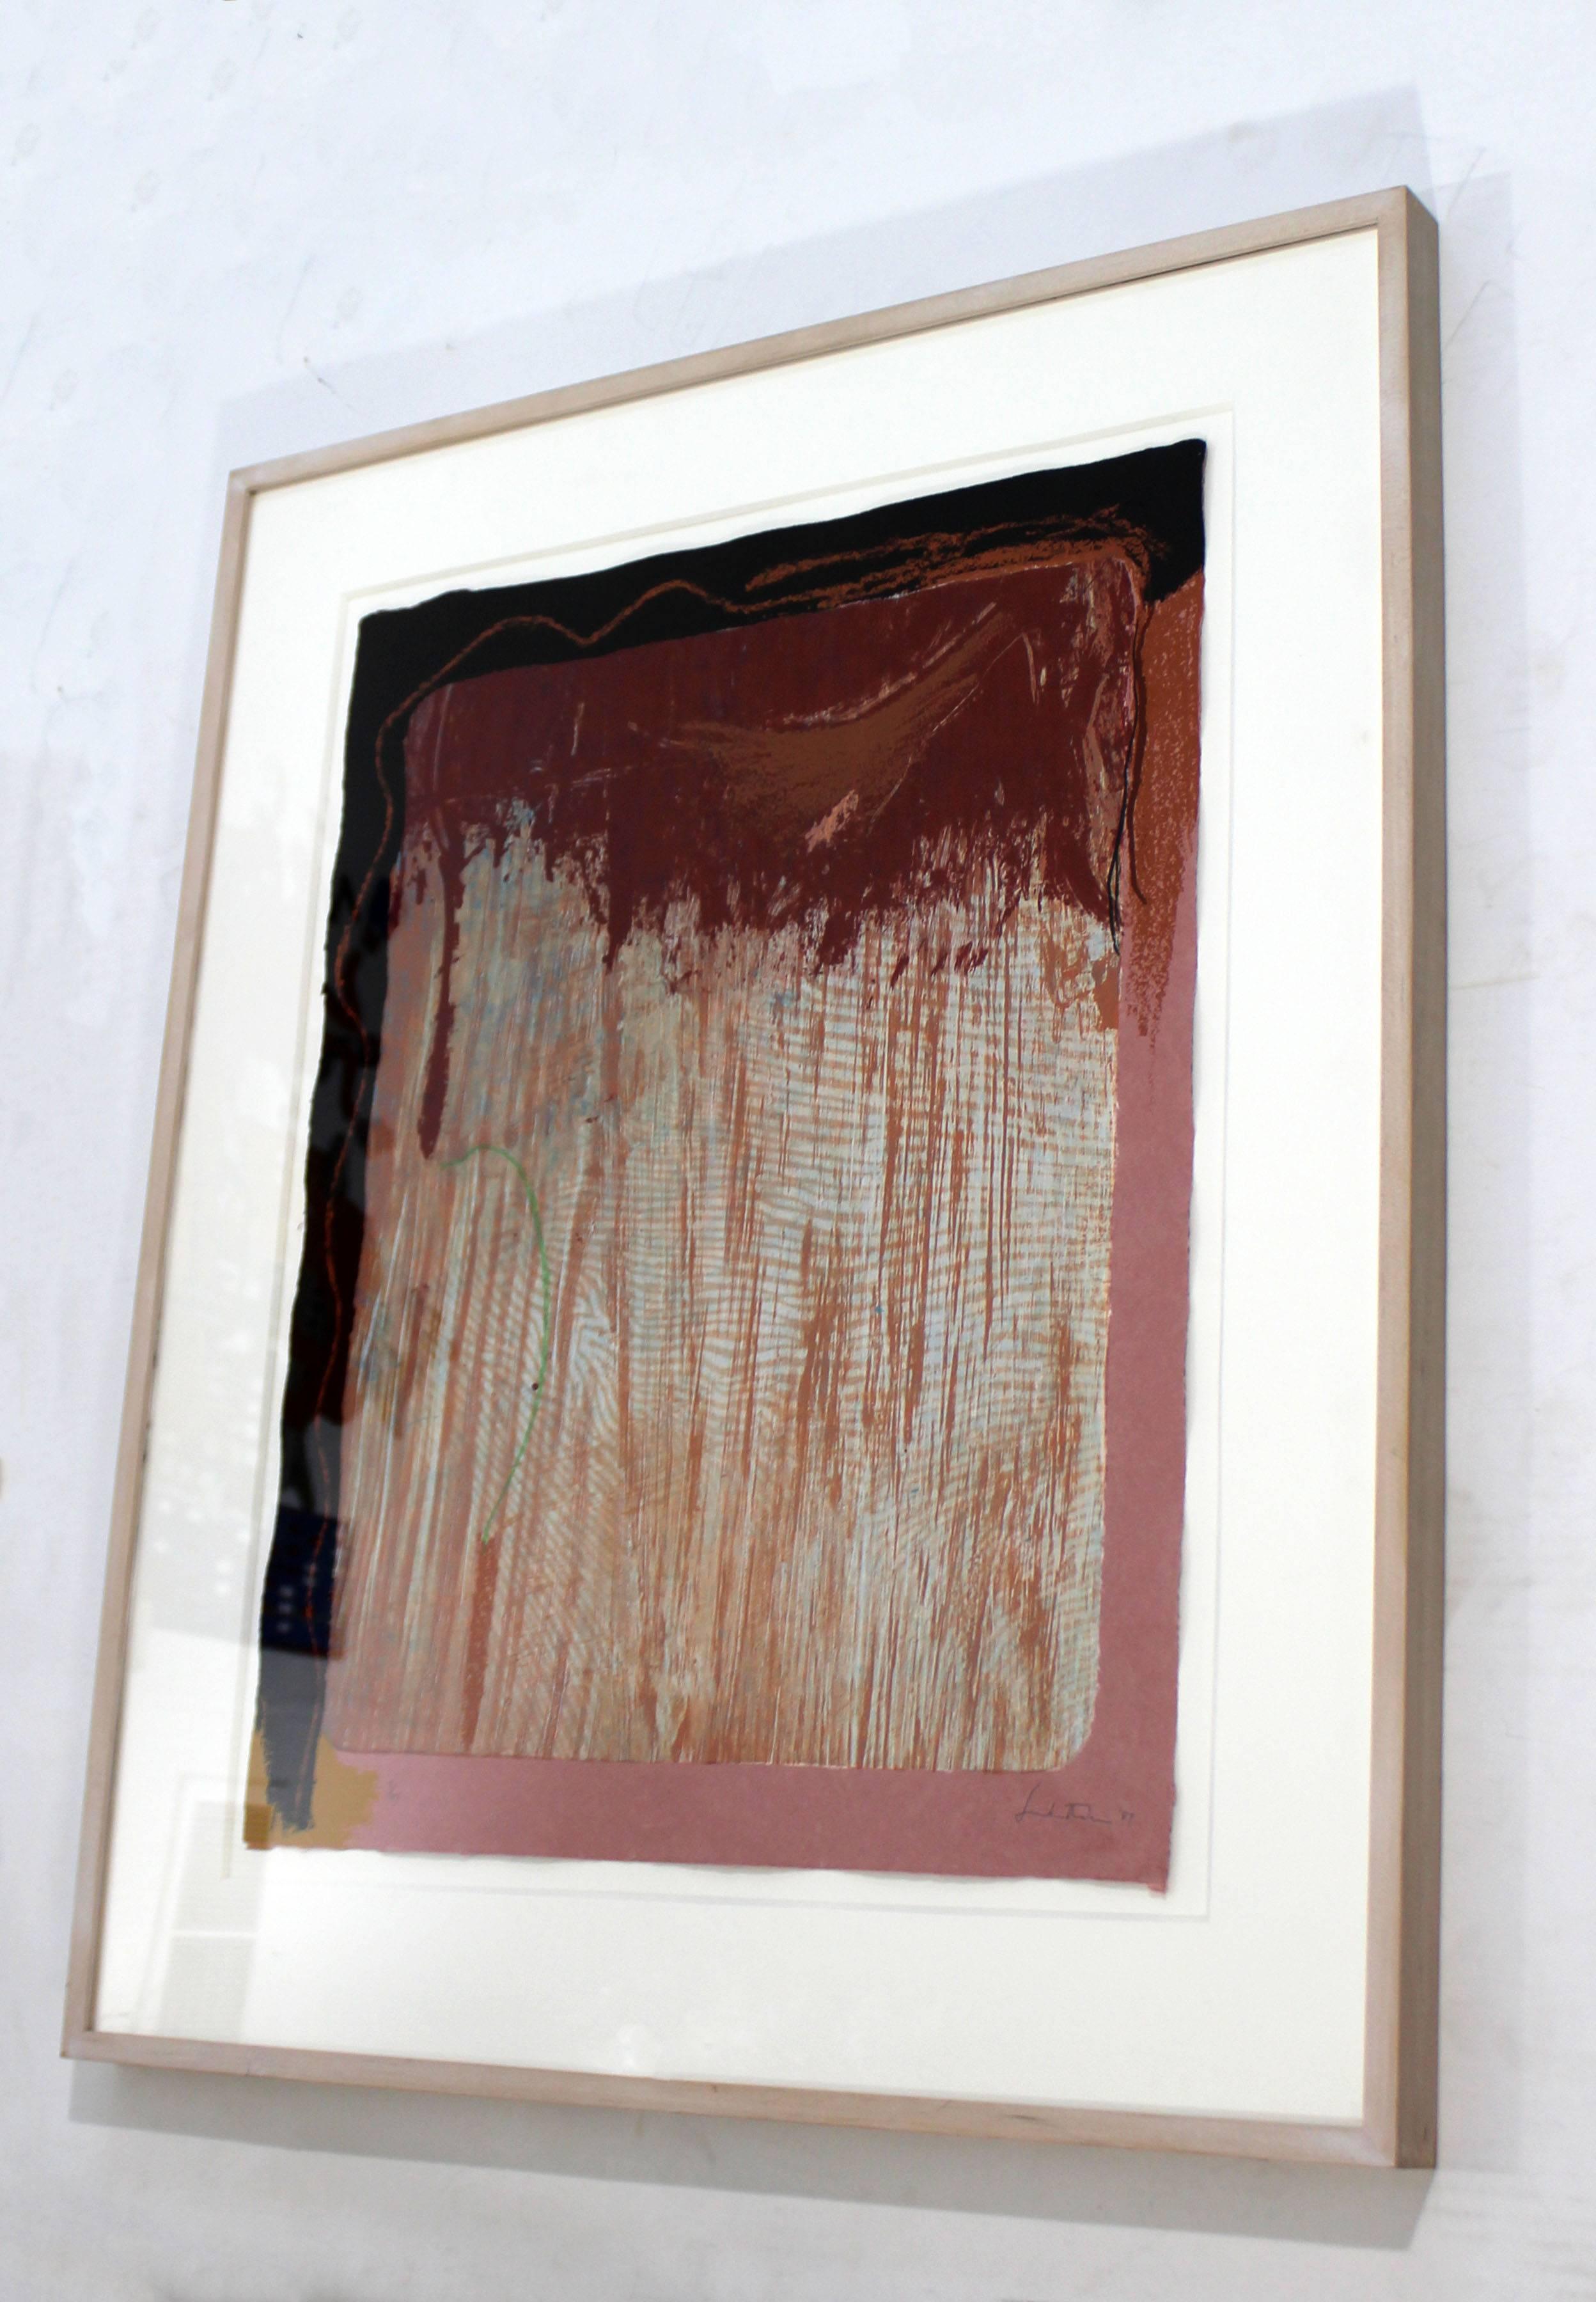 For your consideration is a lithograph of Helen Frankenthaler's 